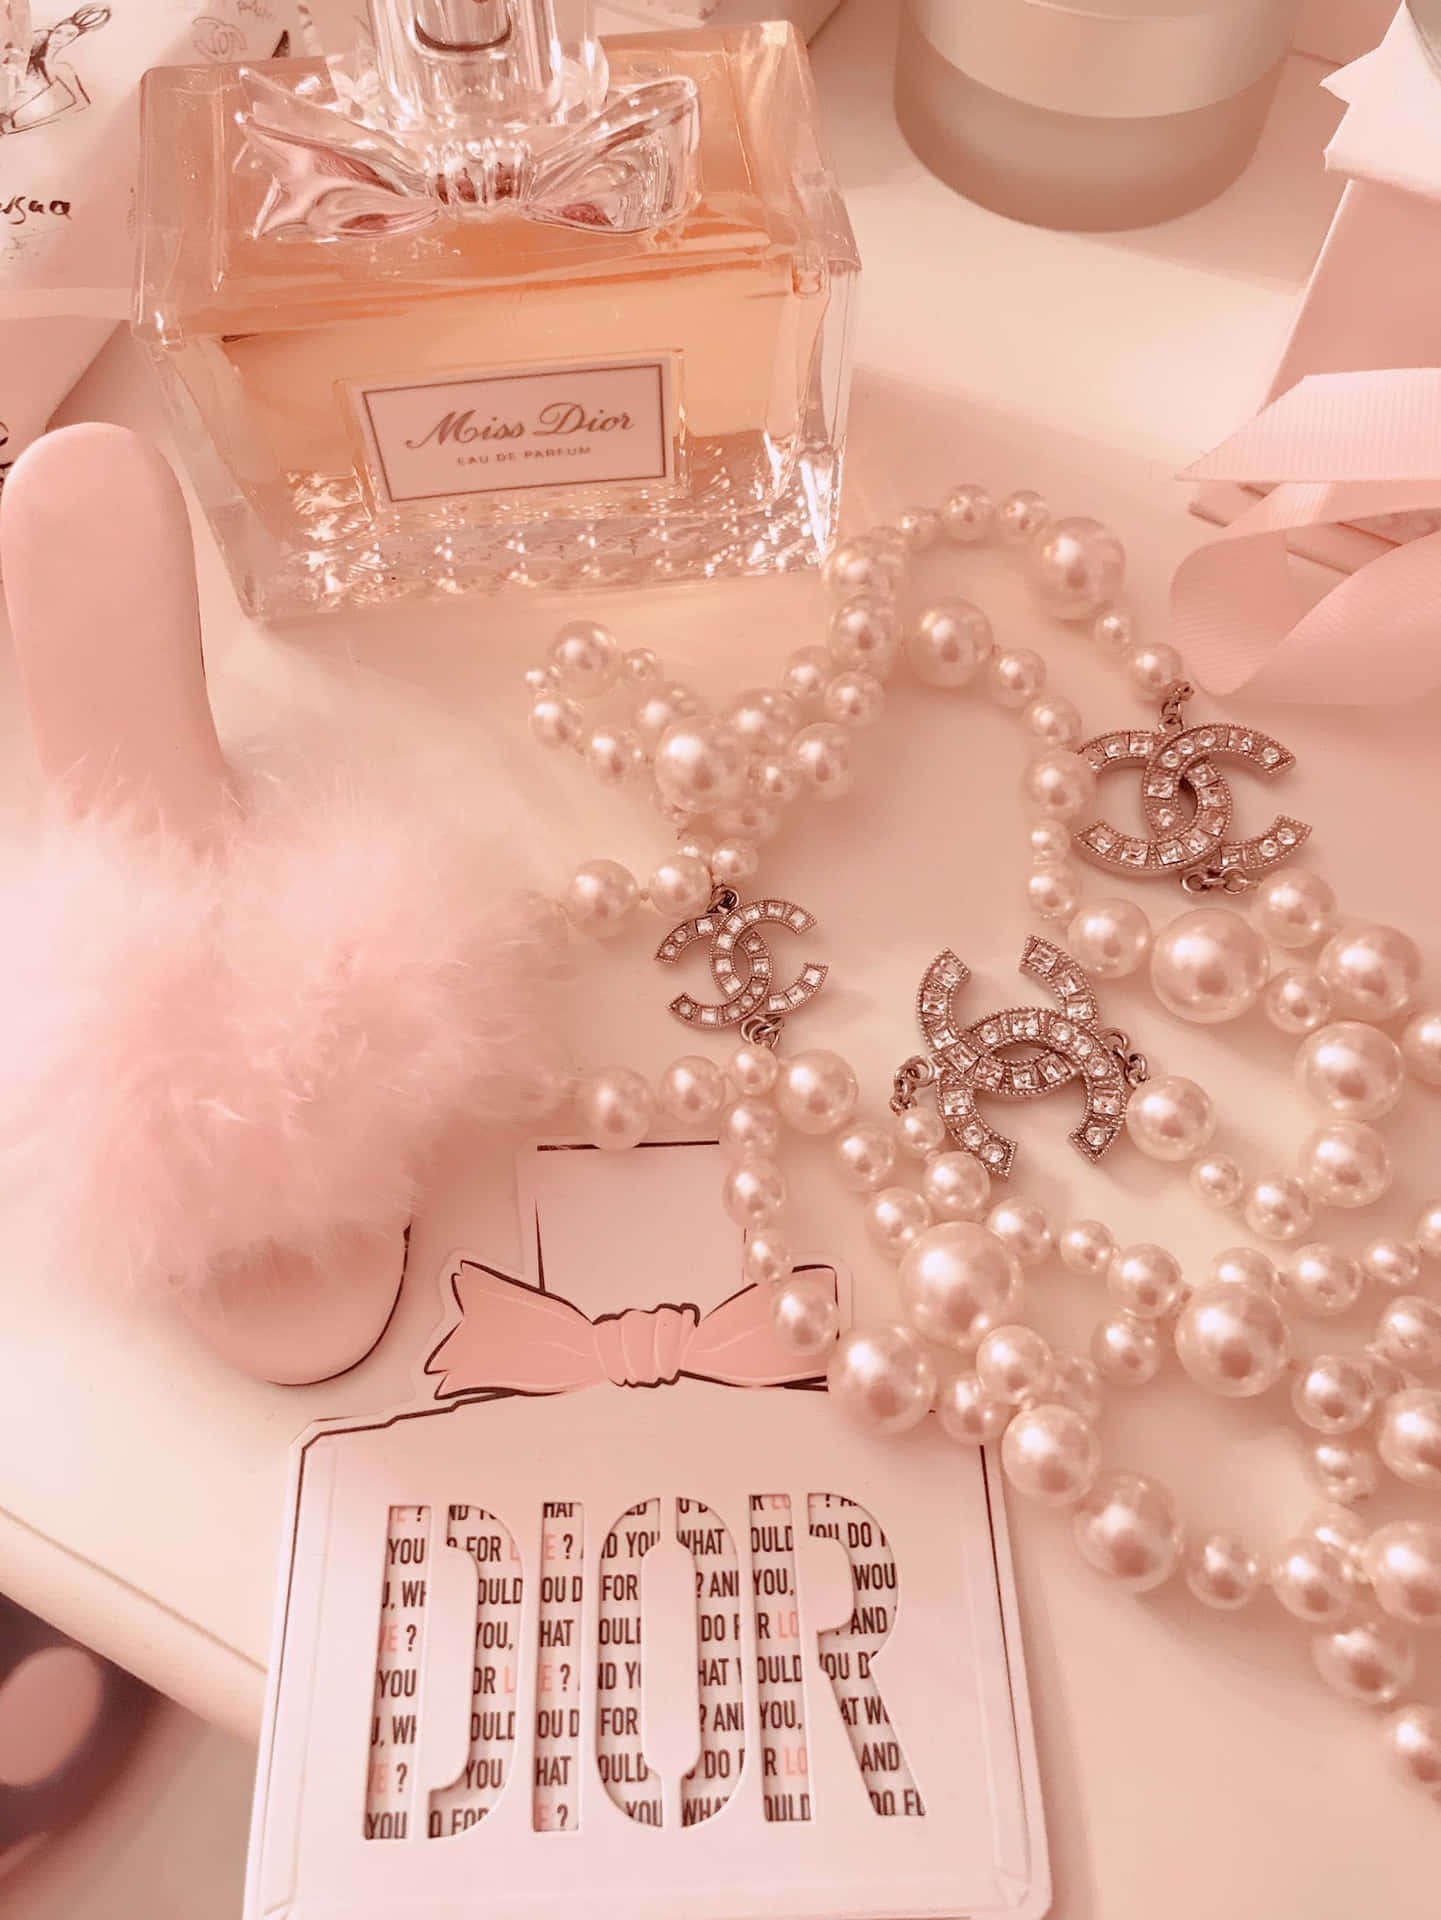 A flat lay of a white table with Miss Dior perfume, pearls, a white fluffy bunny and a white chanel brooch. - Bling, Dior, boujee